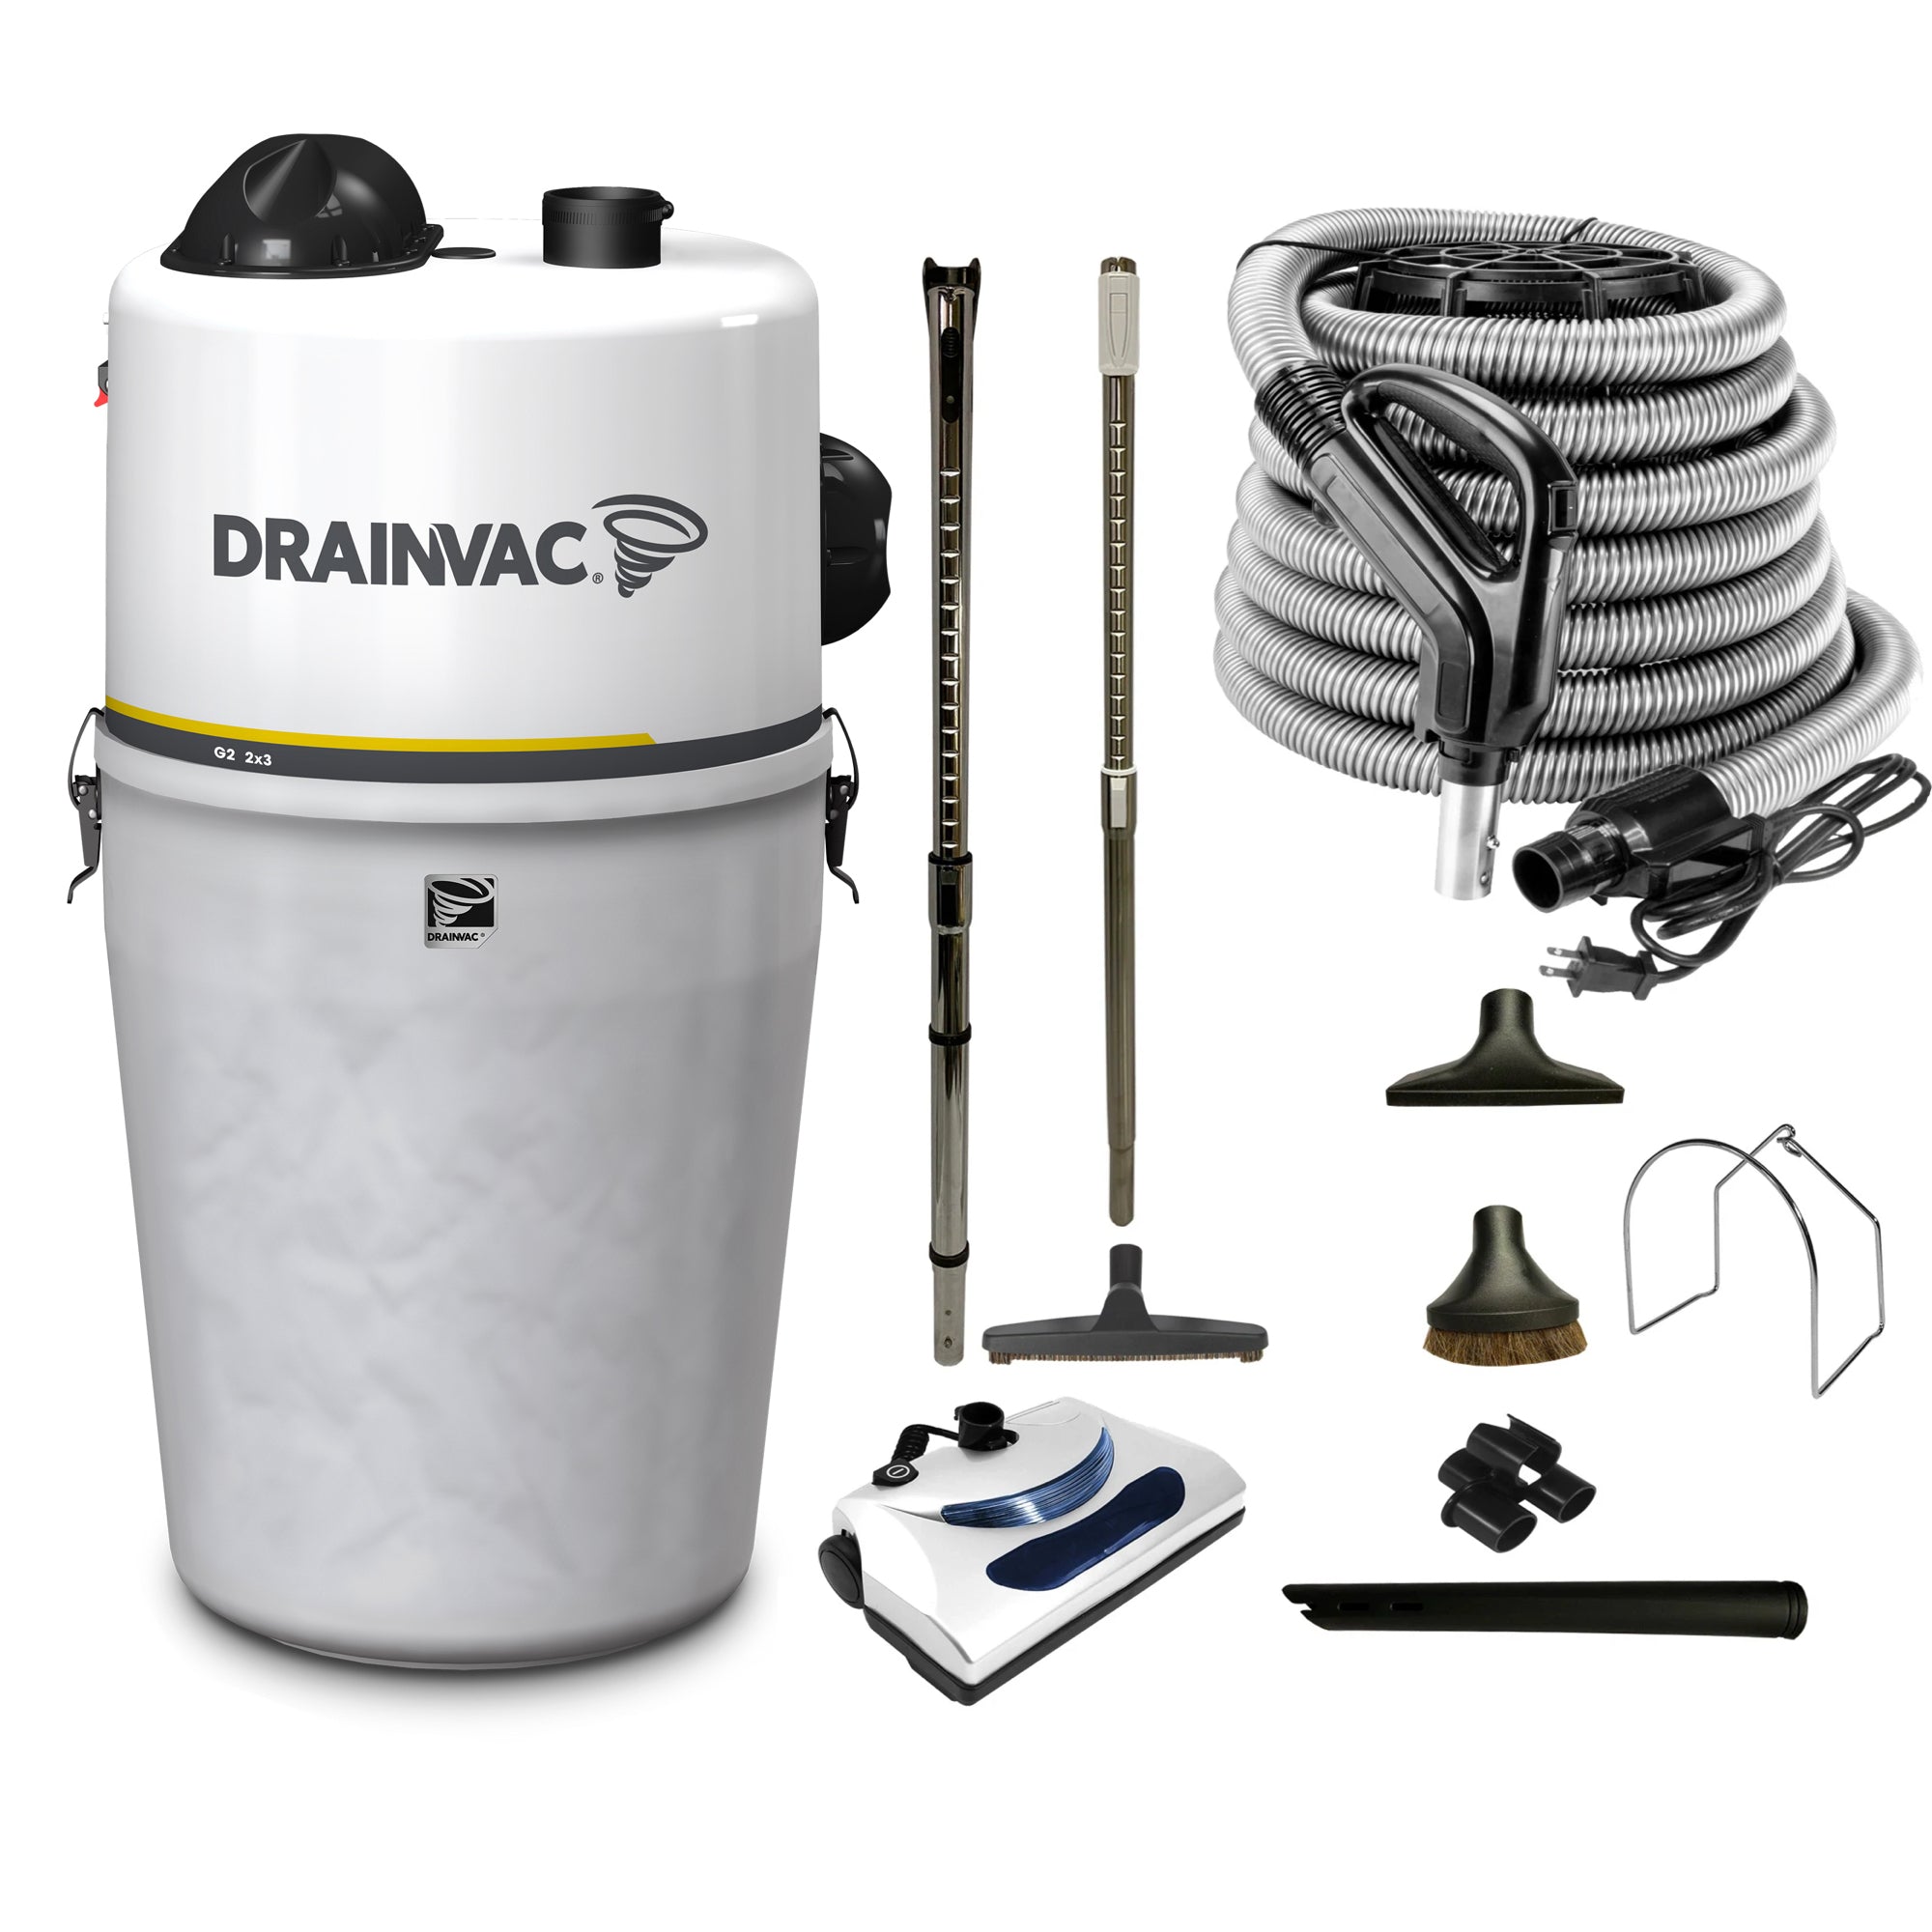 DrainVac G2-2x3 Central Vacuum with Basic Electric Package